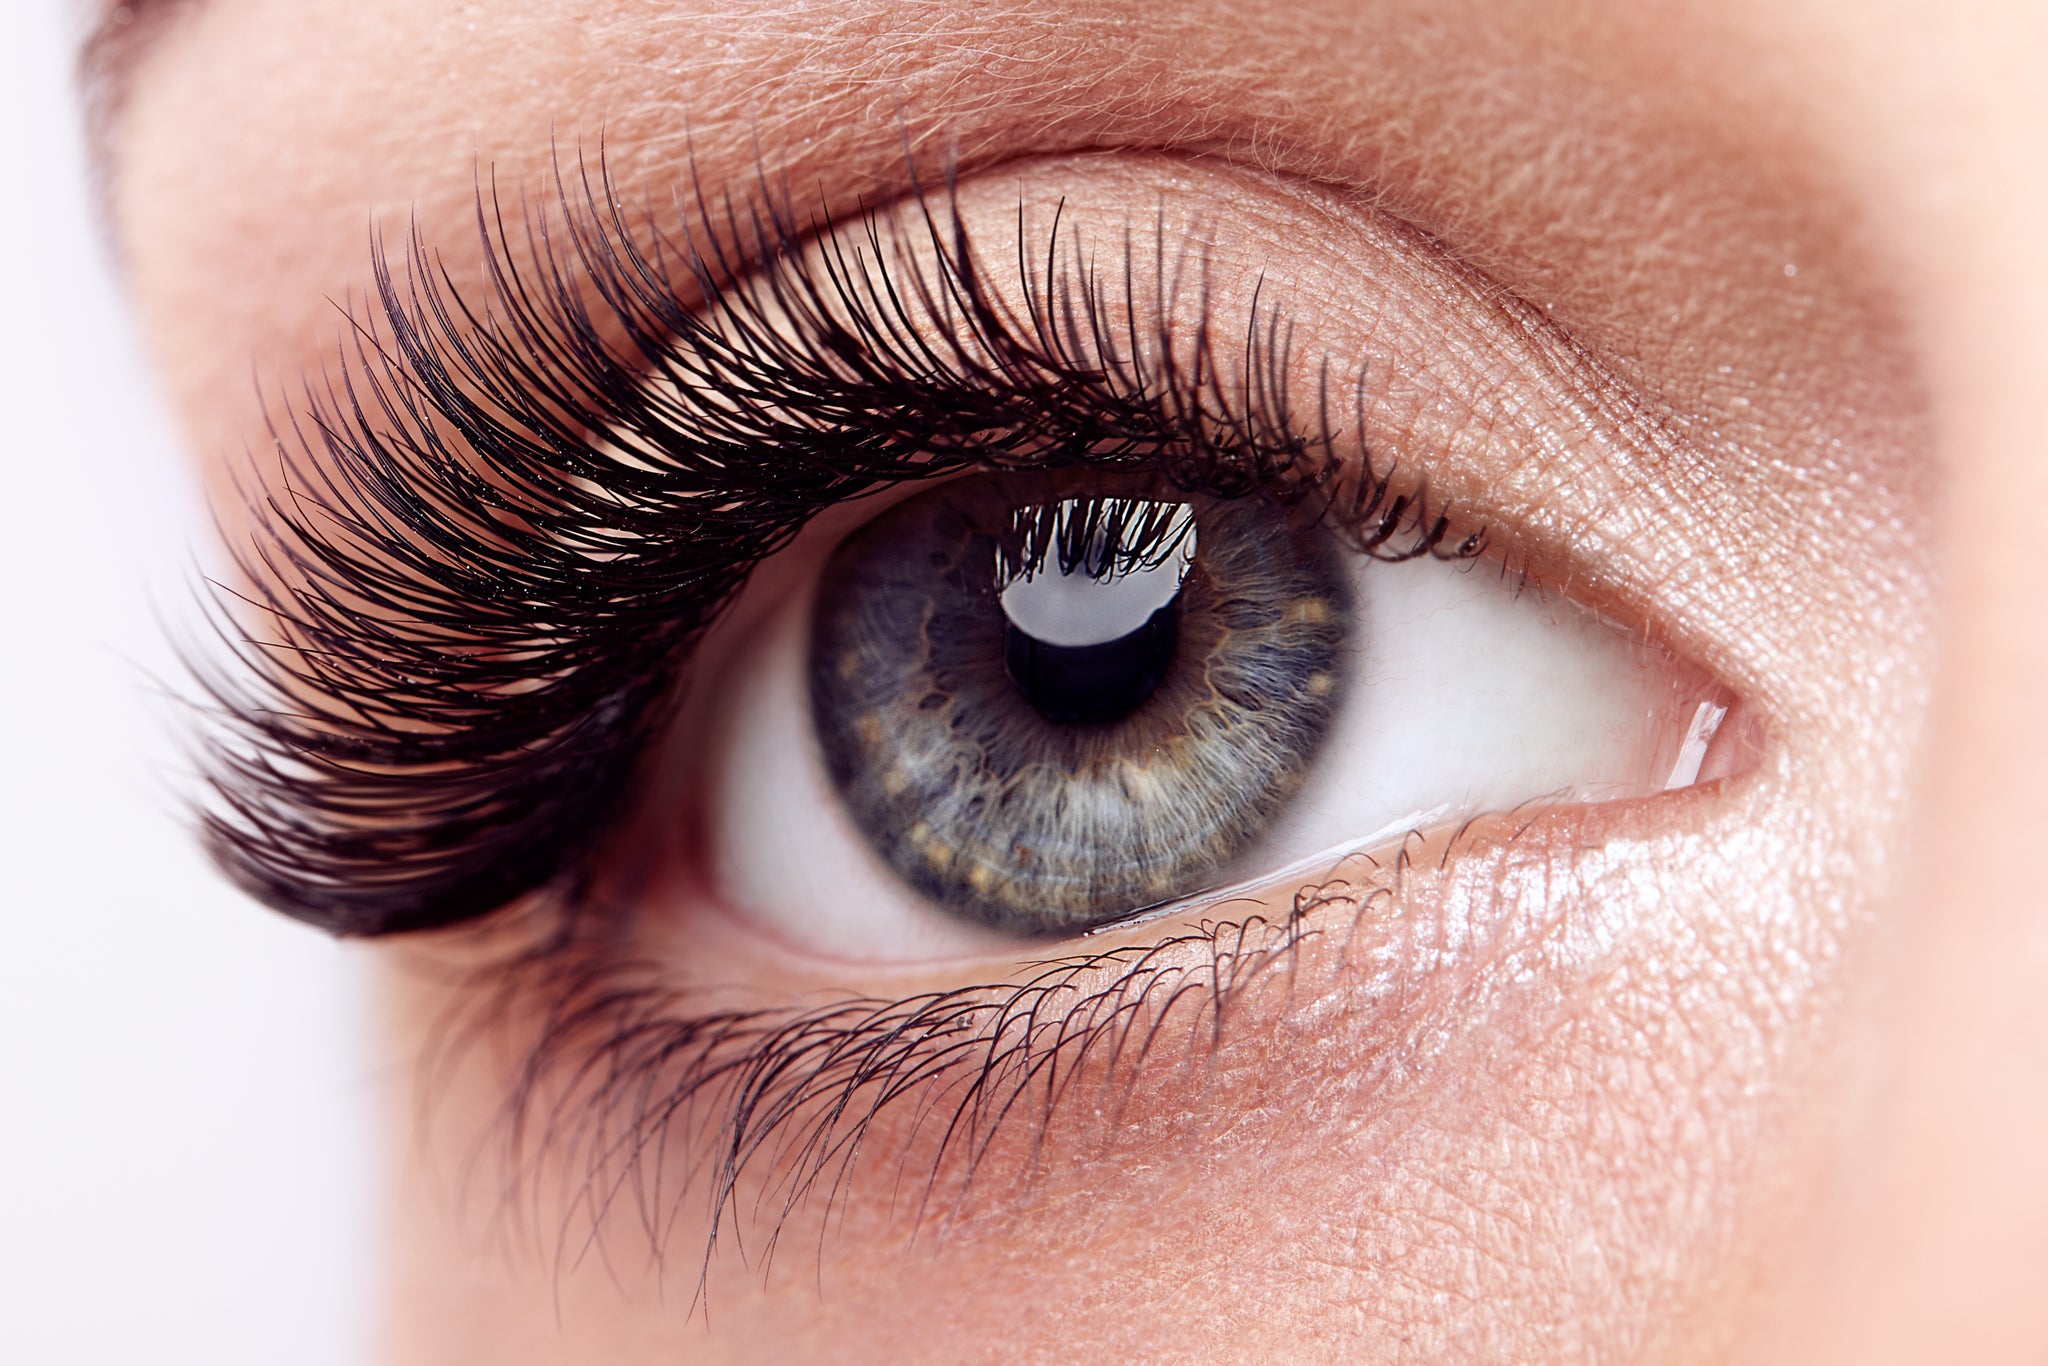 What Causes Eyelashes To Fall Out